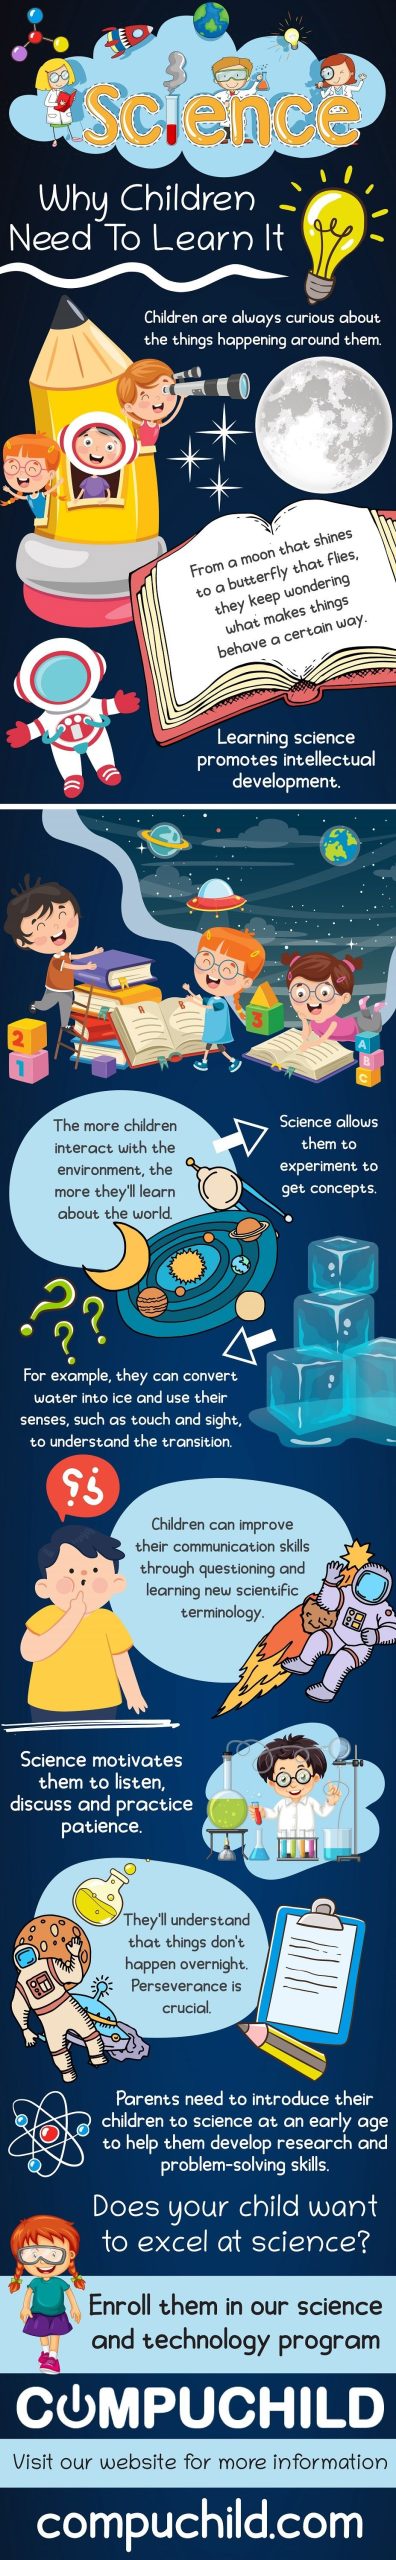 Science why children need to learn it_jpg_85